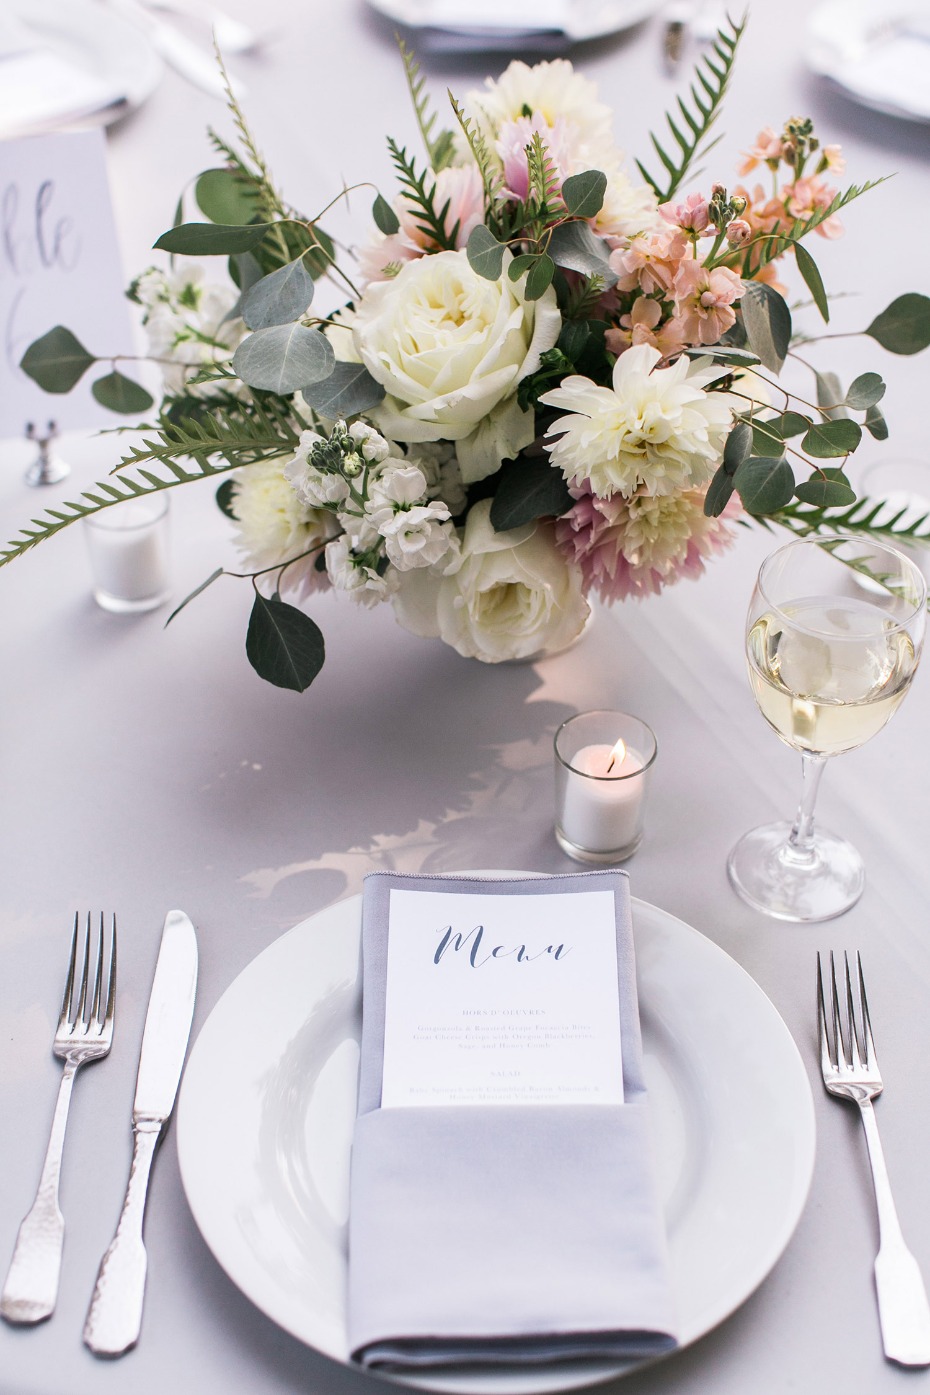 Simple and chic wedding table decor